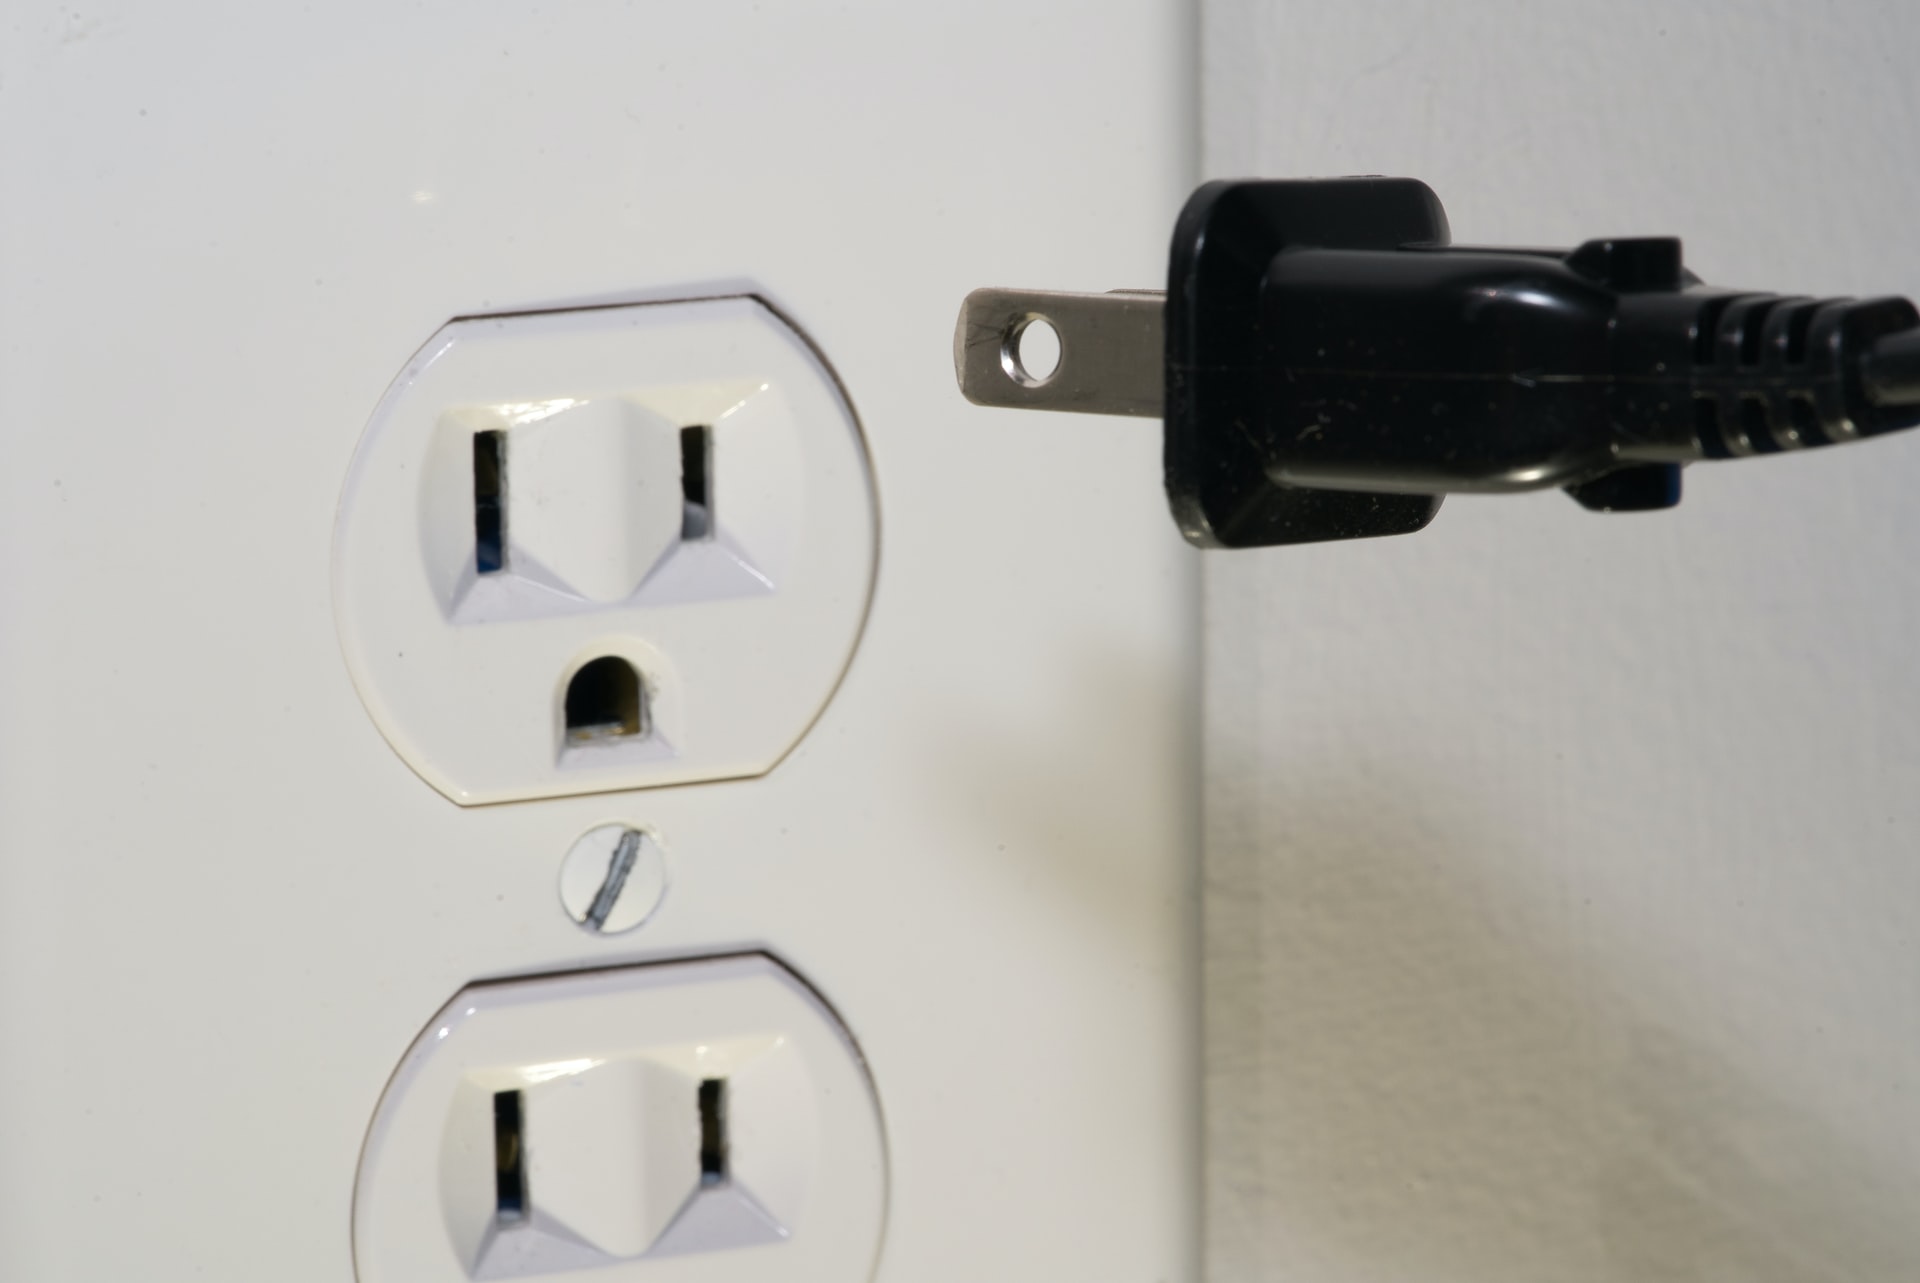 PSU connected to wall outlet